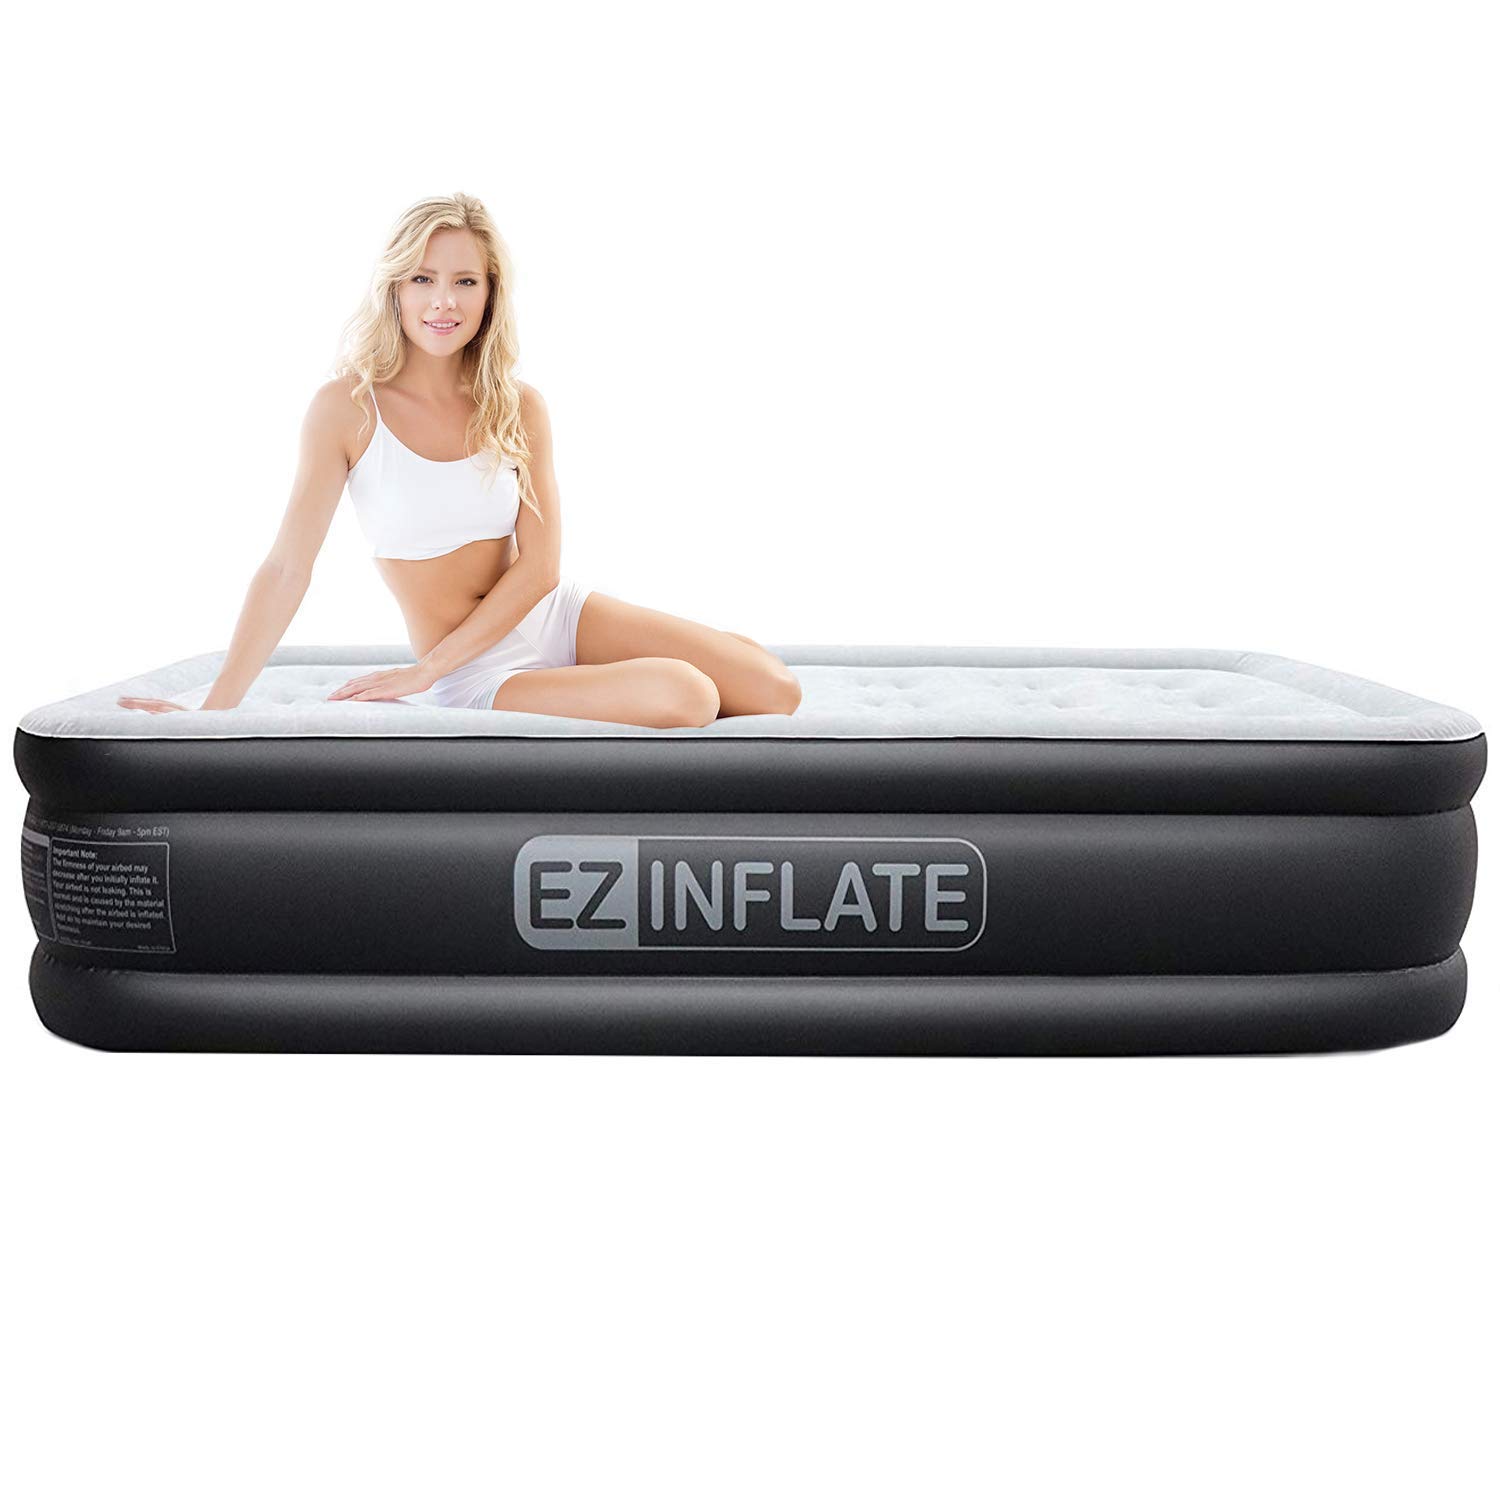 EZ INFLATE Upgraded Twin Air Mattress